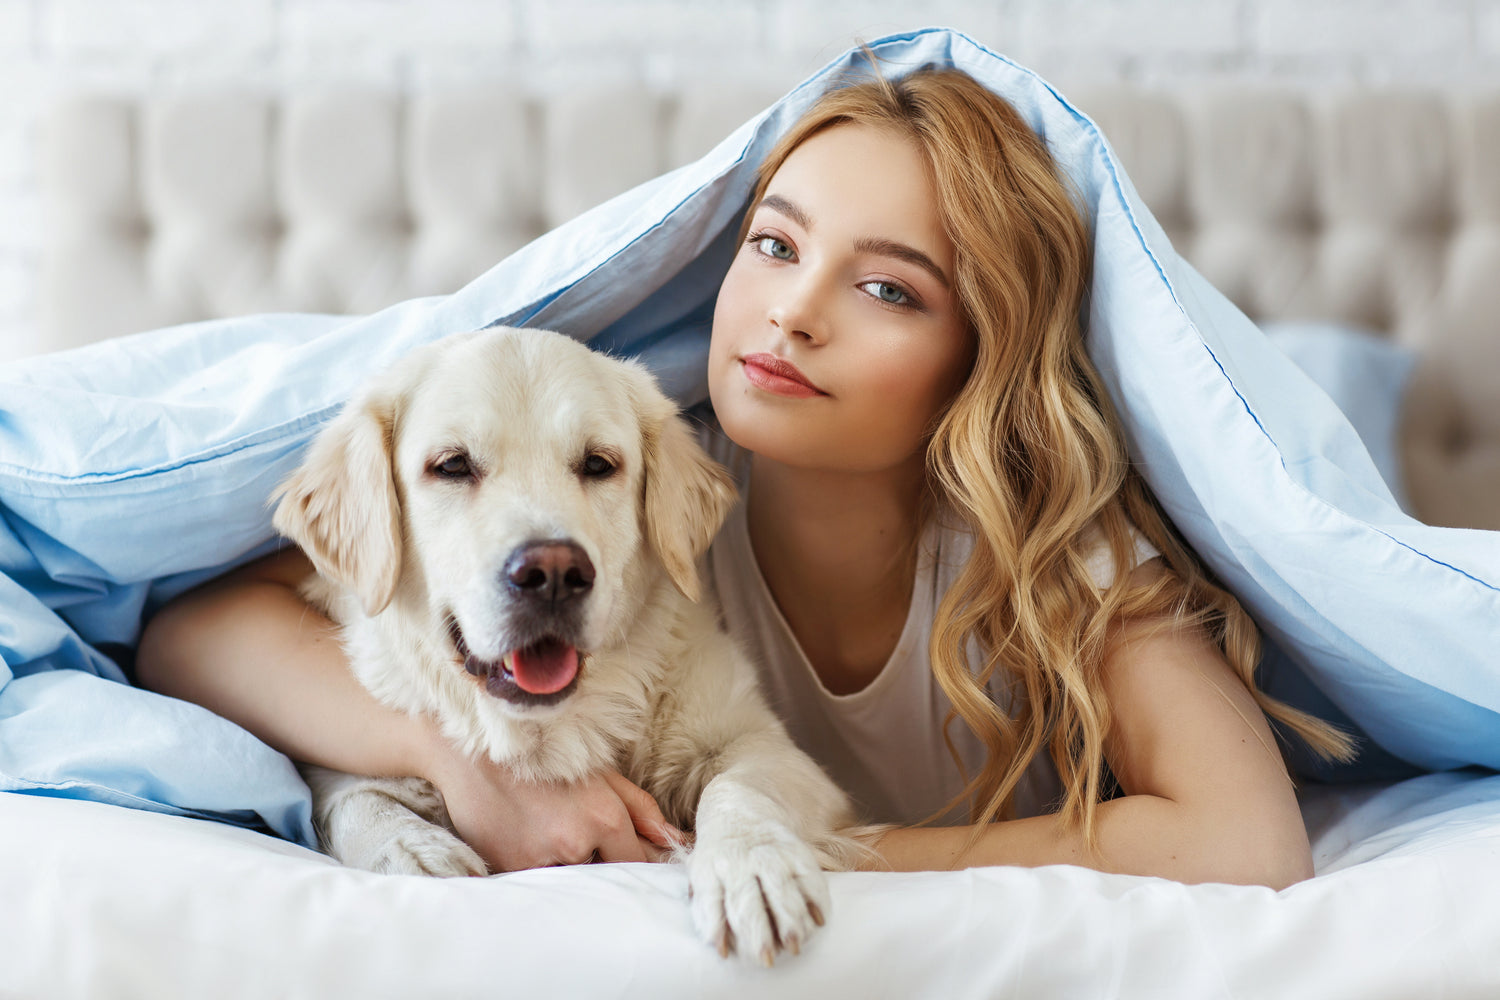 Relax My Dog: Six Methods Every Dog Owner Should Know